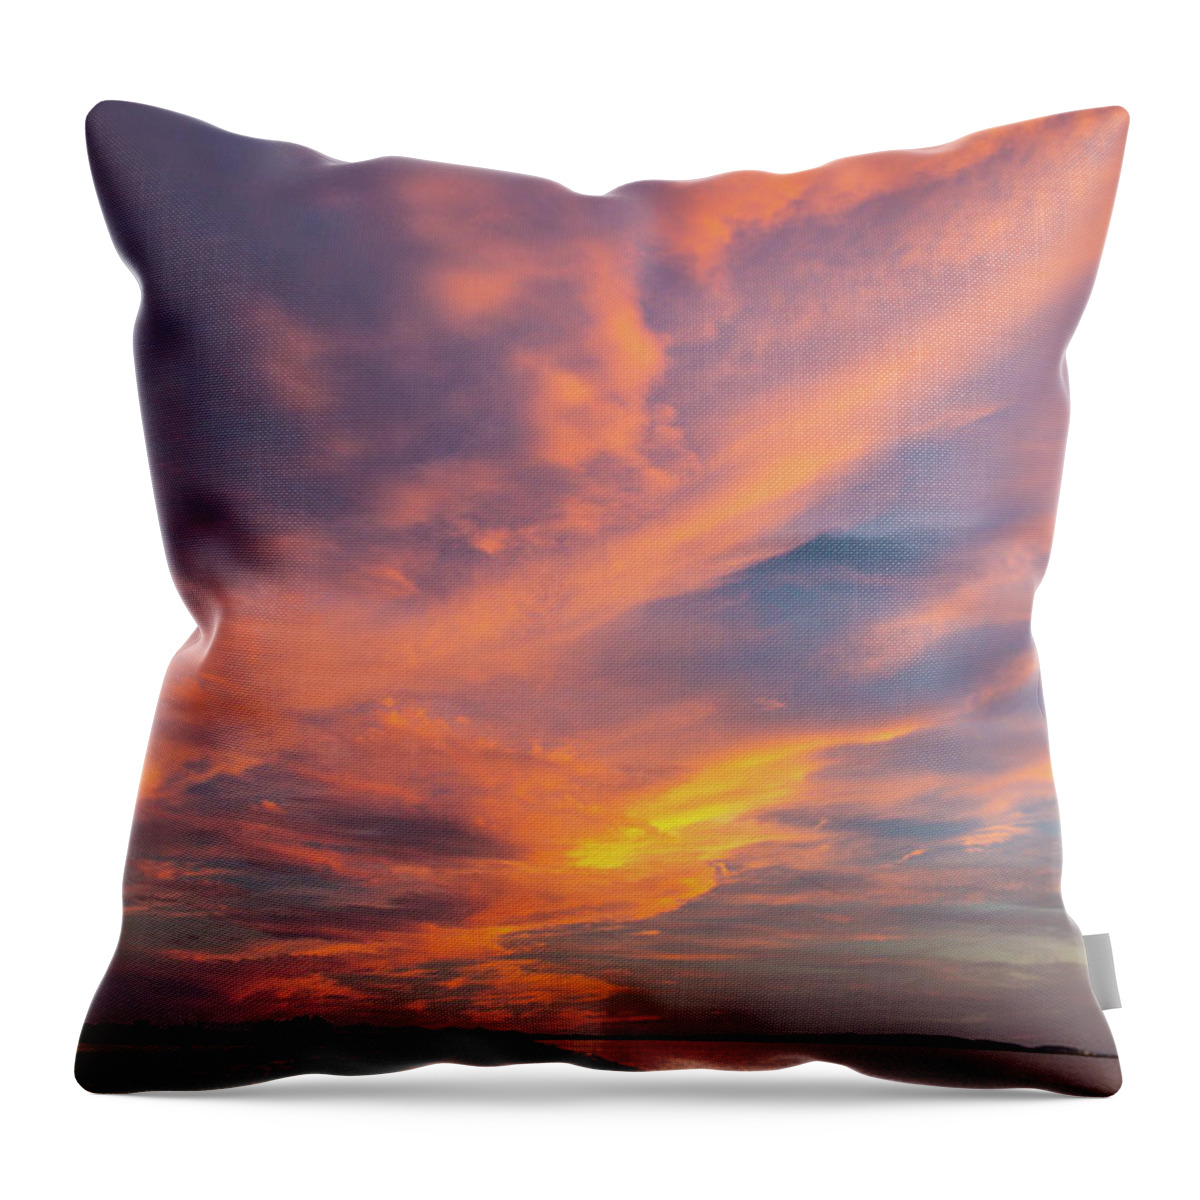 Lake Throw Pillow featuring the photograph Painting By Sun by Hyuntae Kim